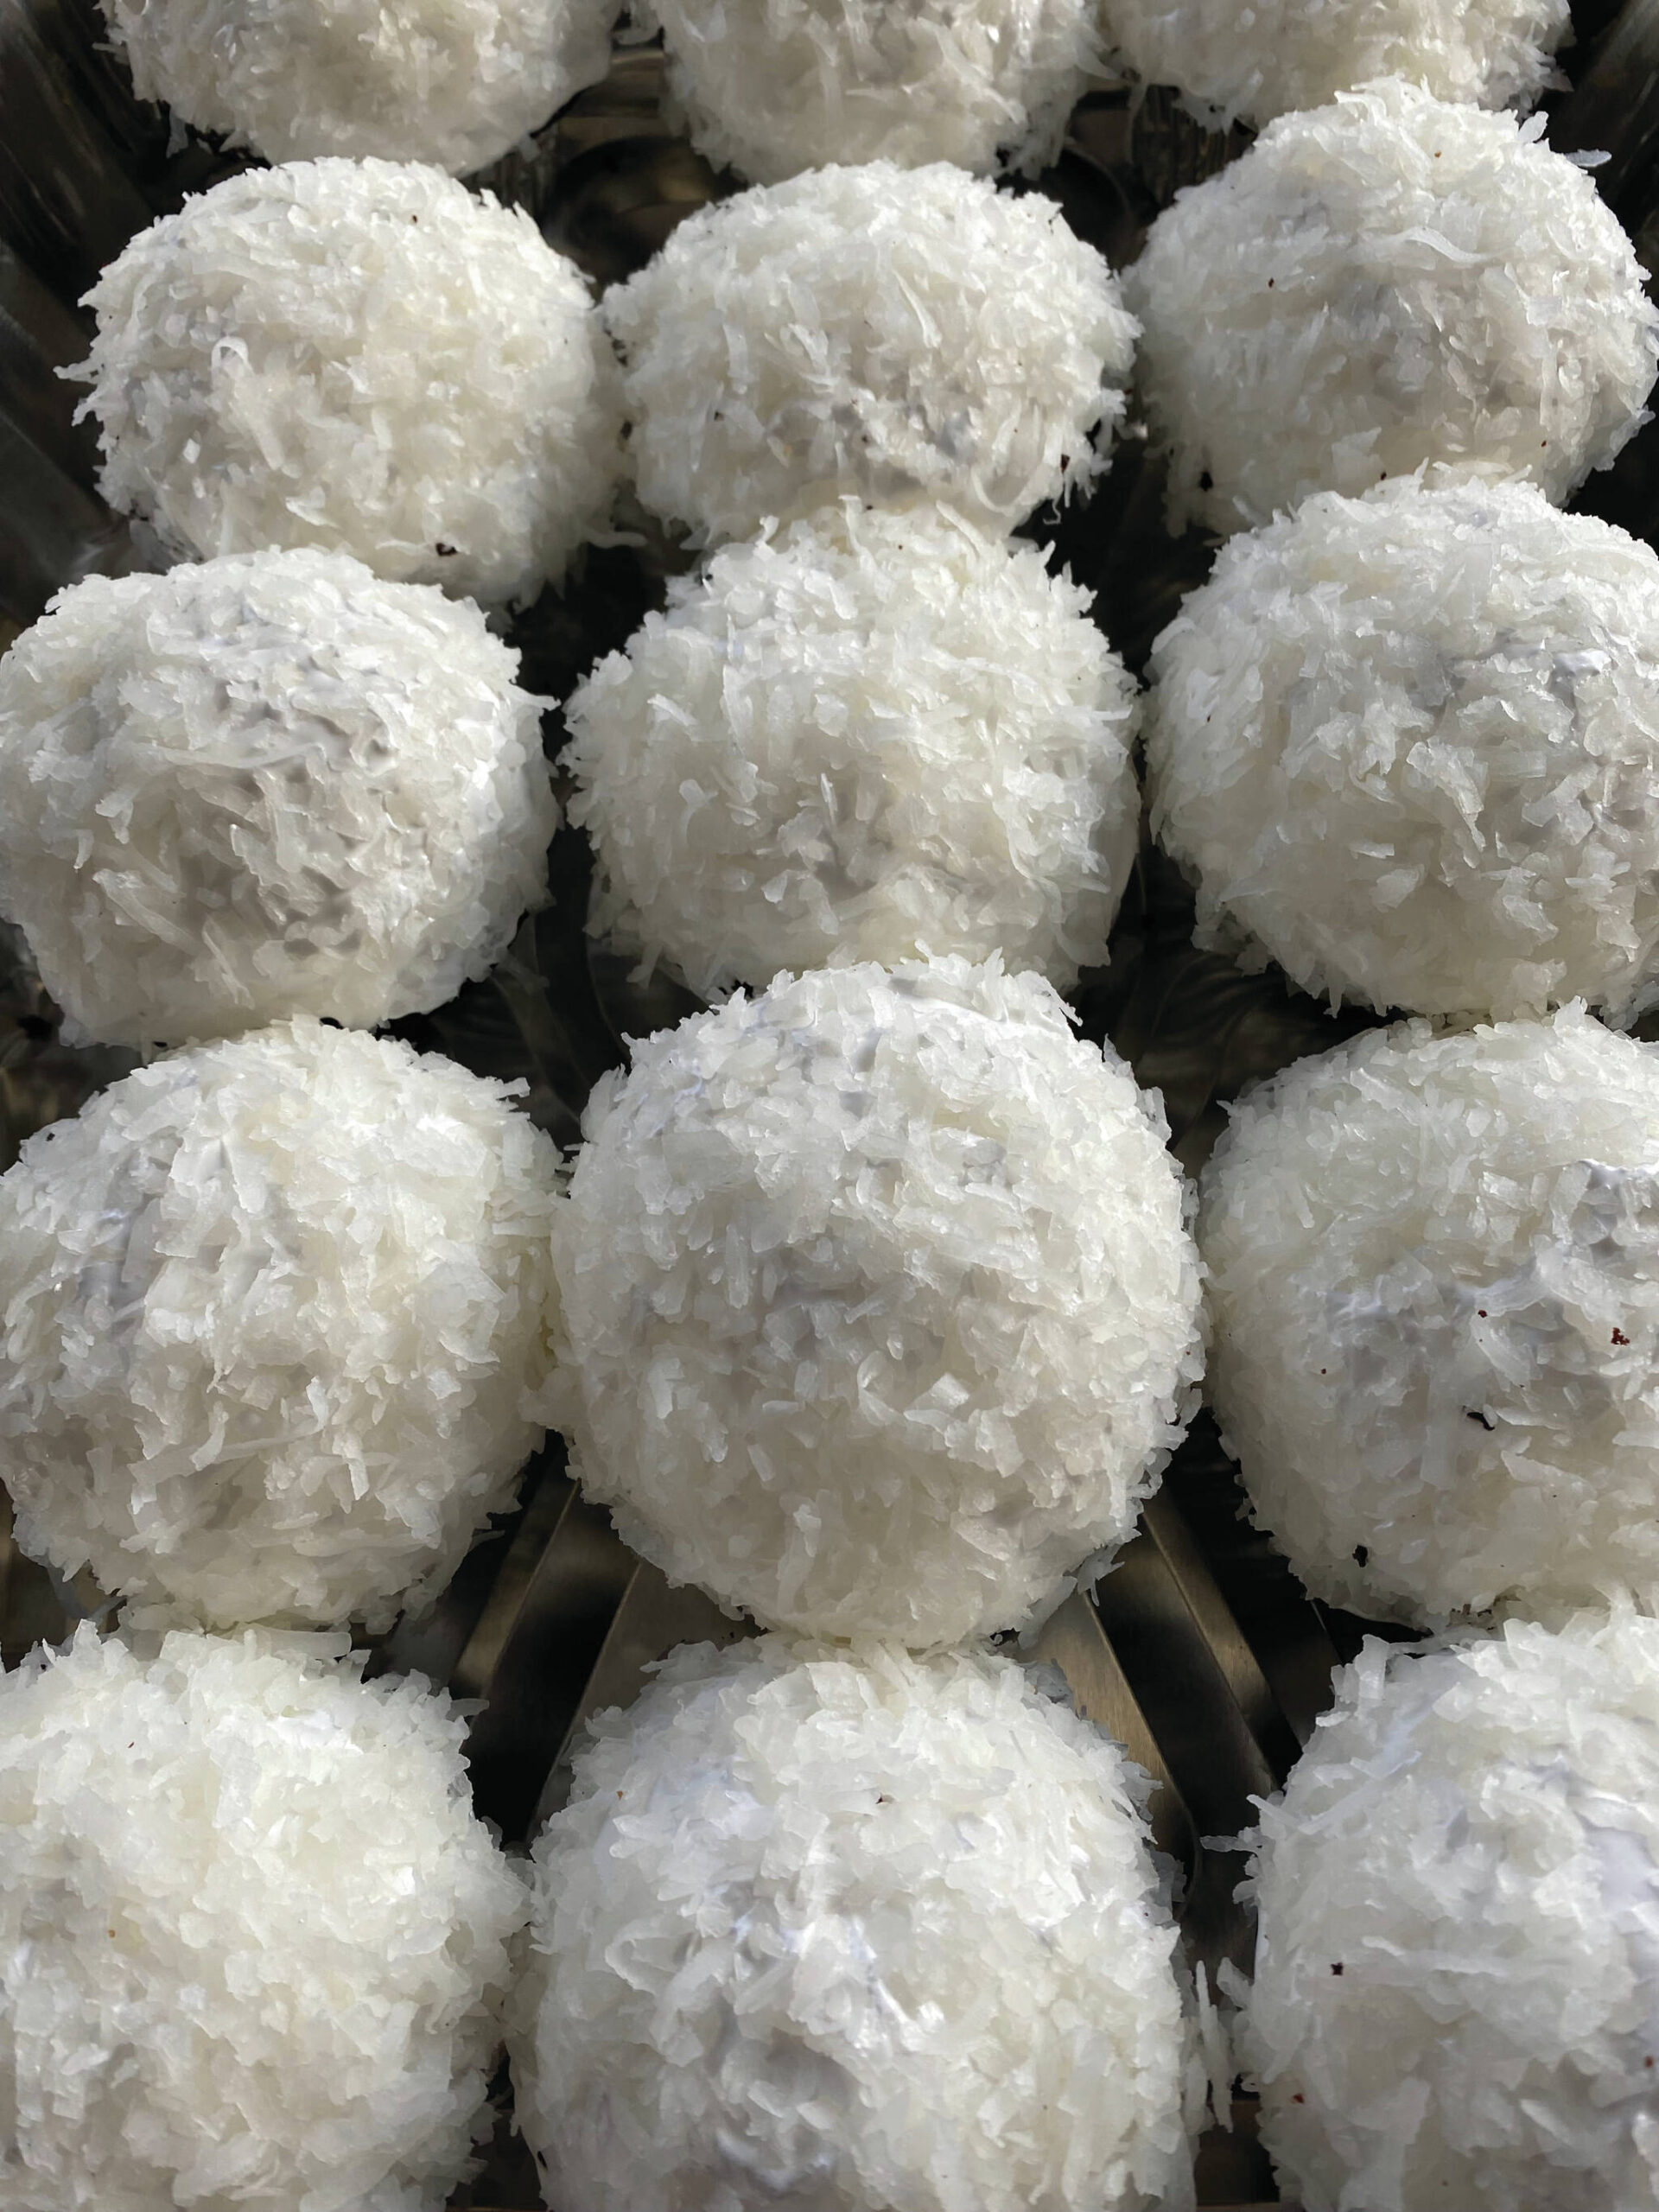 These snowballs are made of chocolate cupcakes are surrounded with sugary meringue and coconut flakes. (Photo by Tressa Dale/Peninsula Clarion)